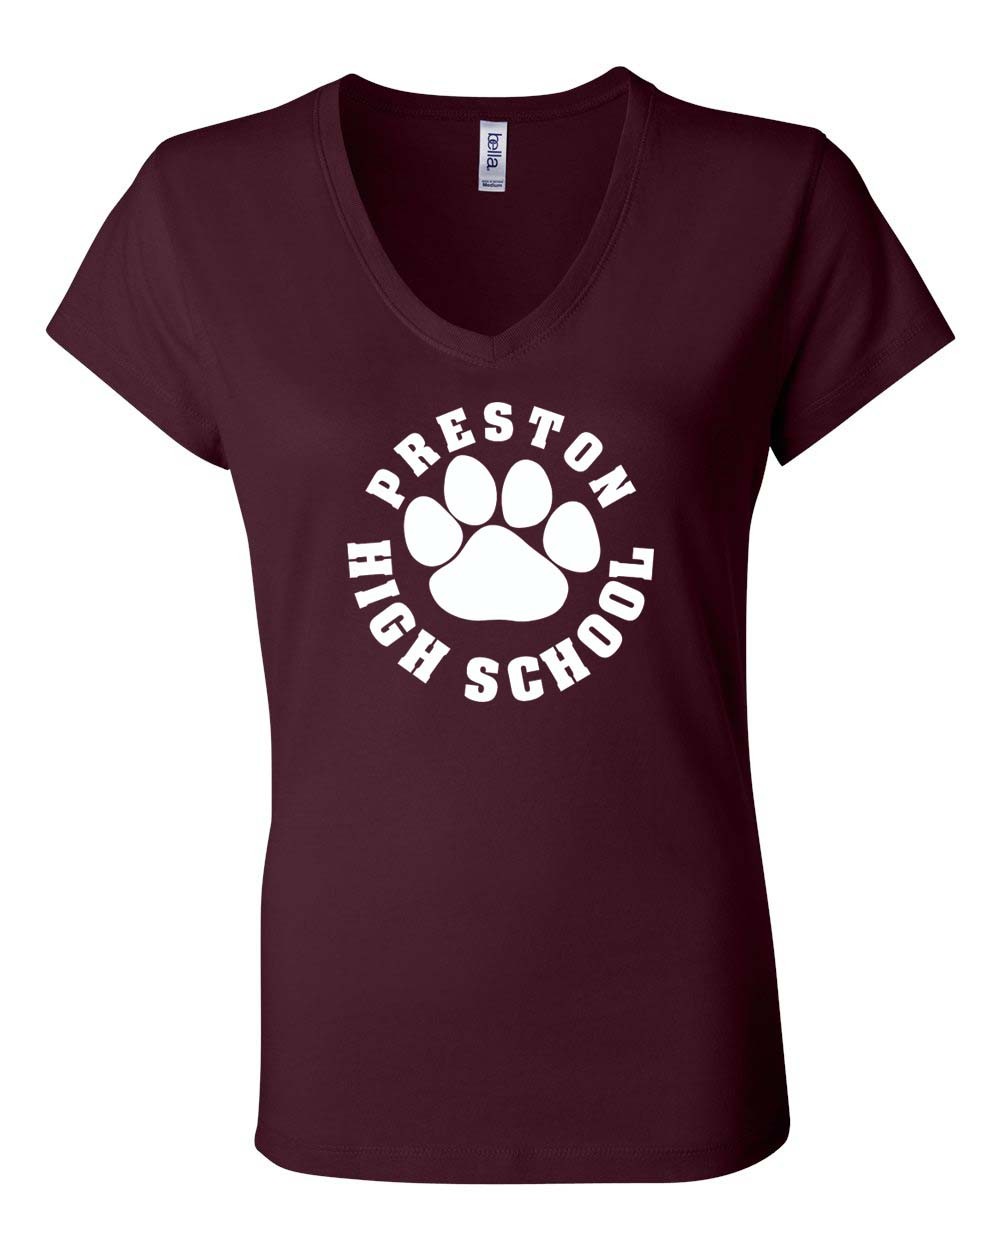 PHS Spirit S/S Ladies V-Neck T-Shirt w/ White Logo - Please allow 2-3 Weeks for Delivery